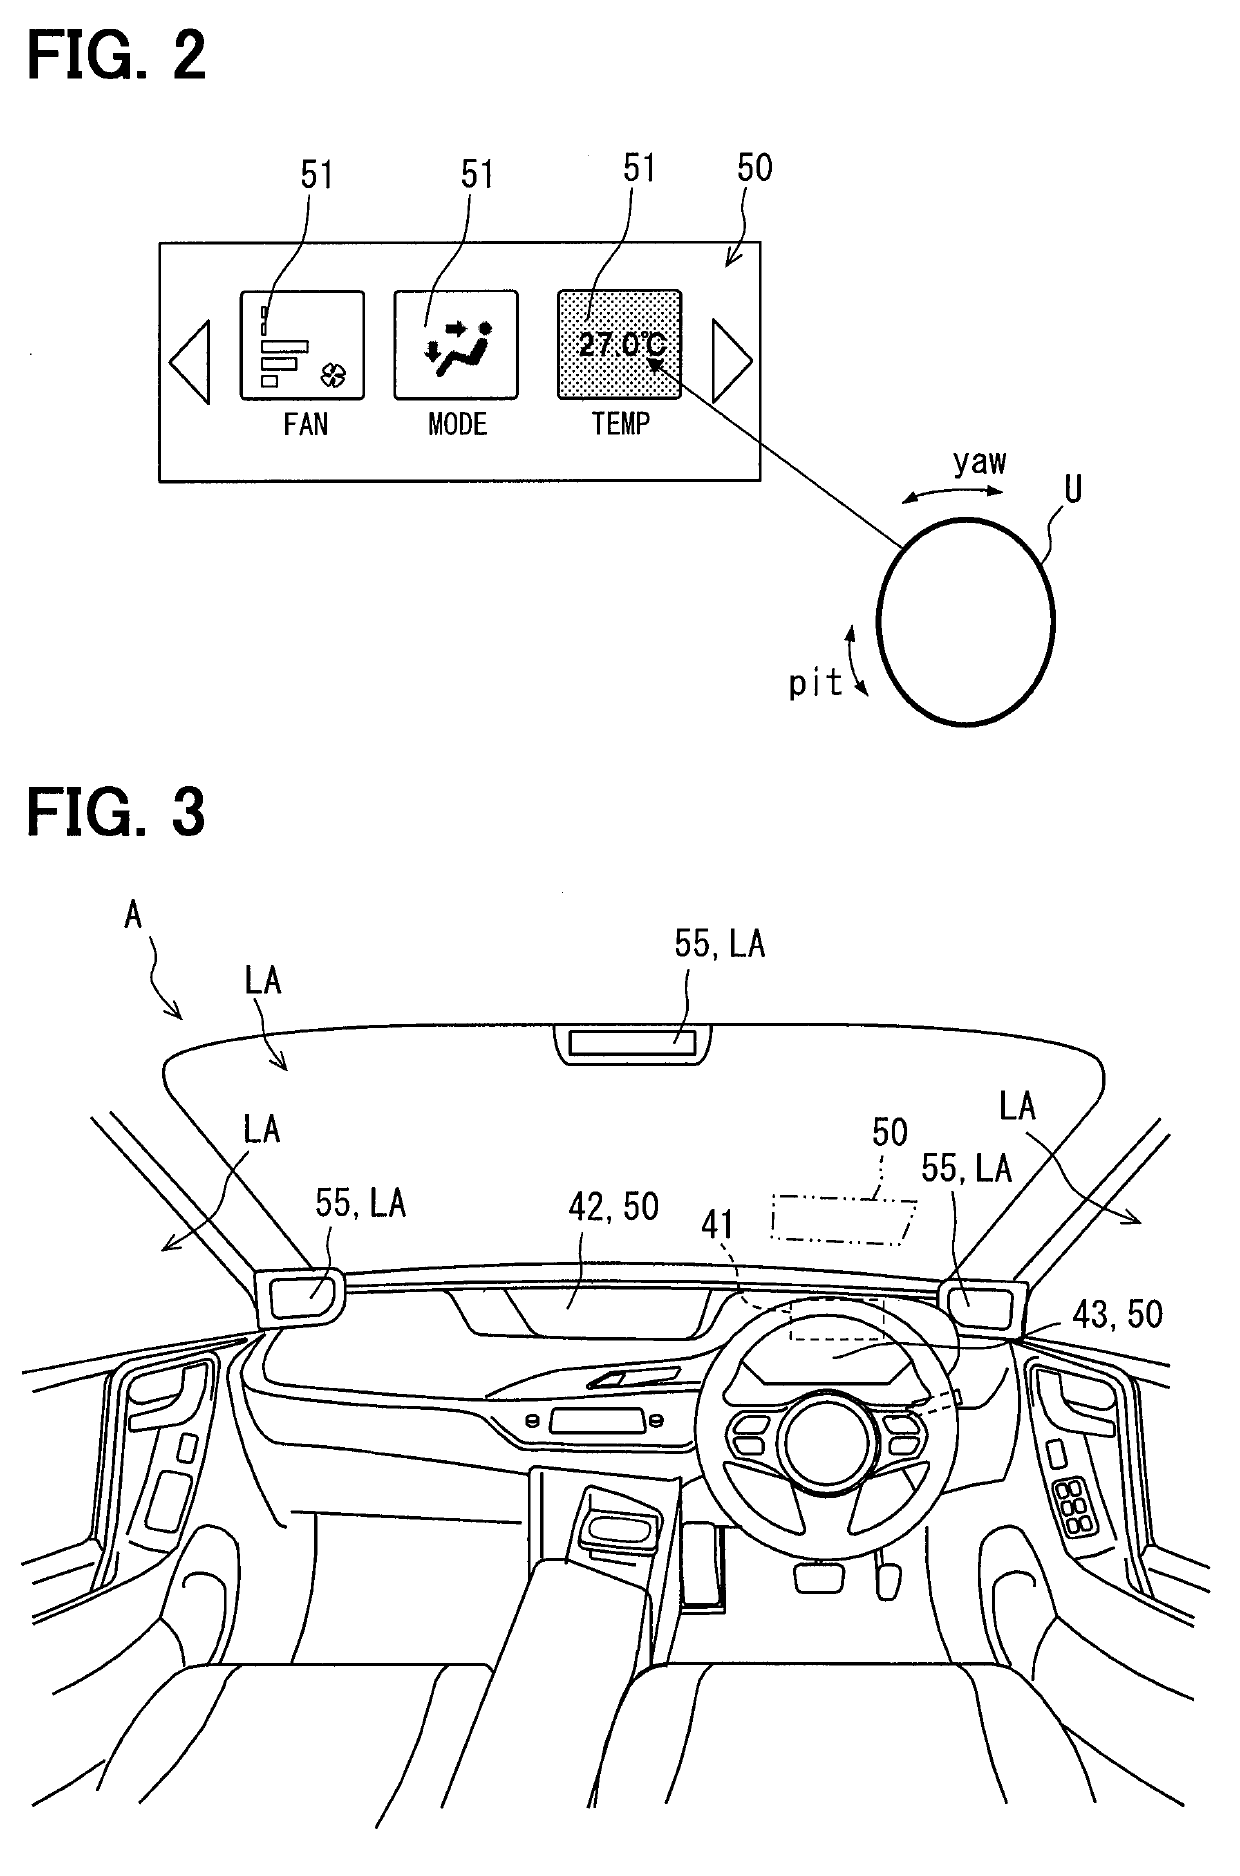 Gesture detection device